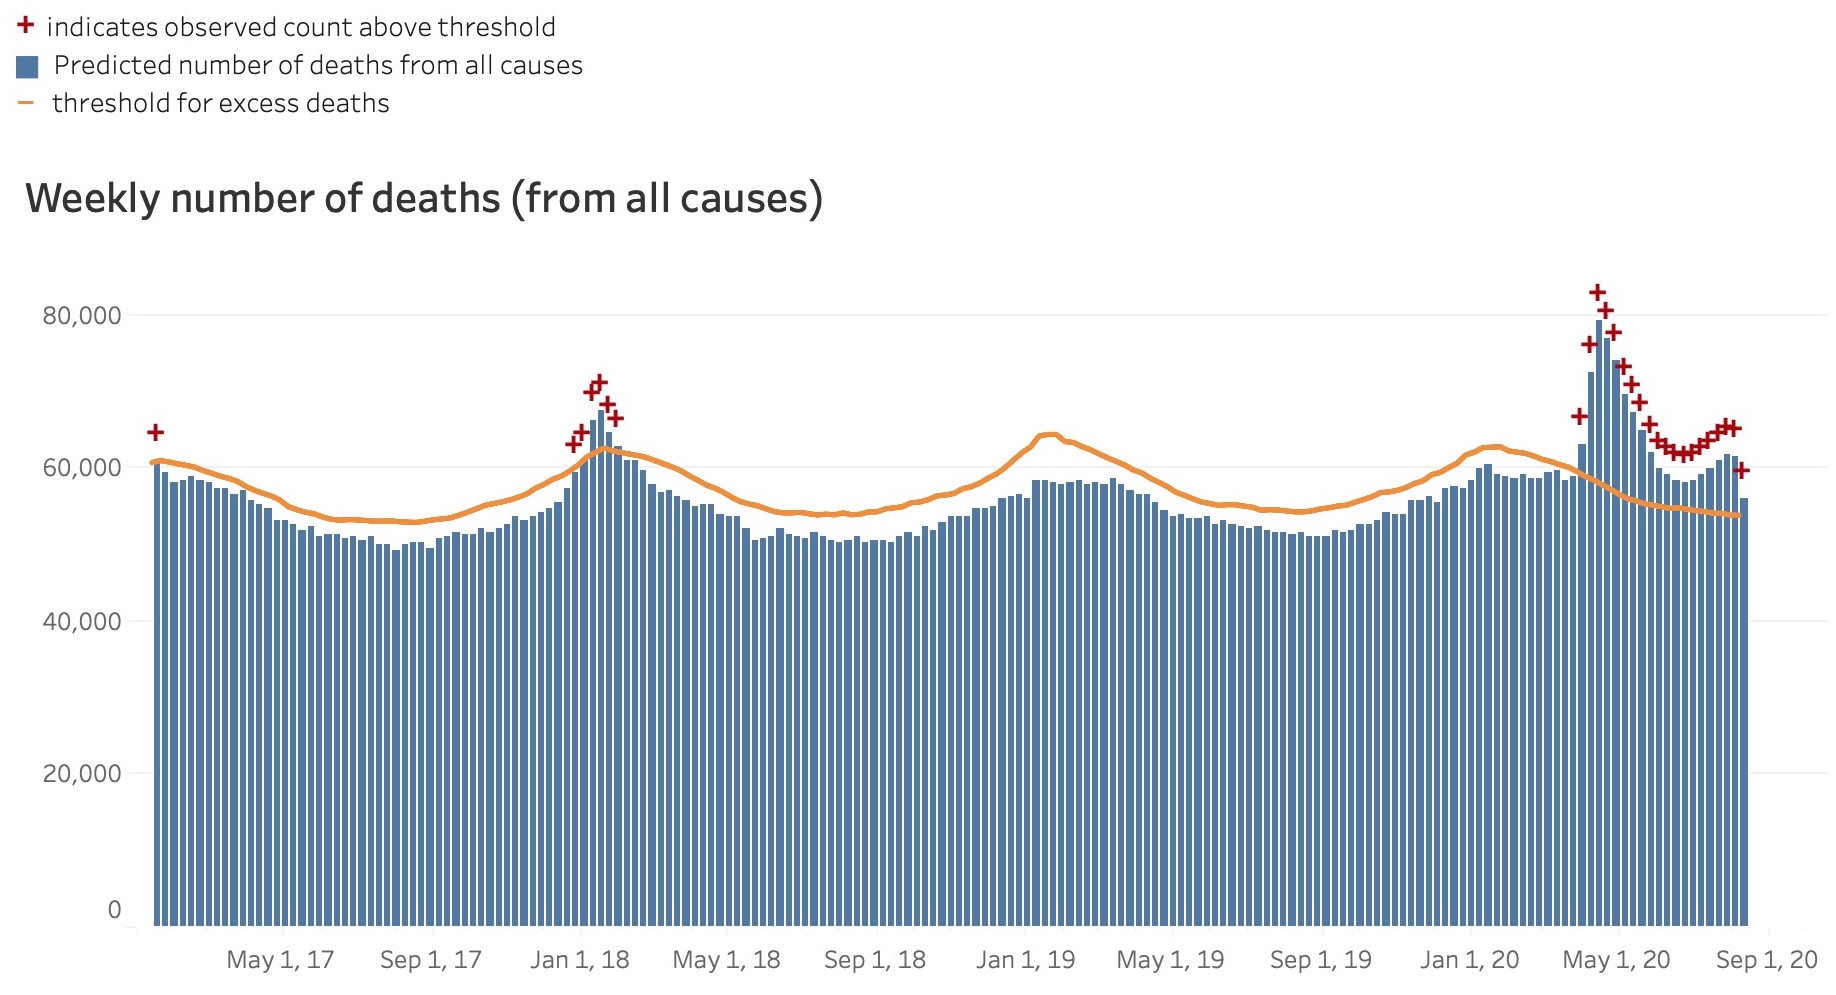 Excess deaths during COVID19 likely include deaths owing to lockdowns